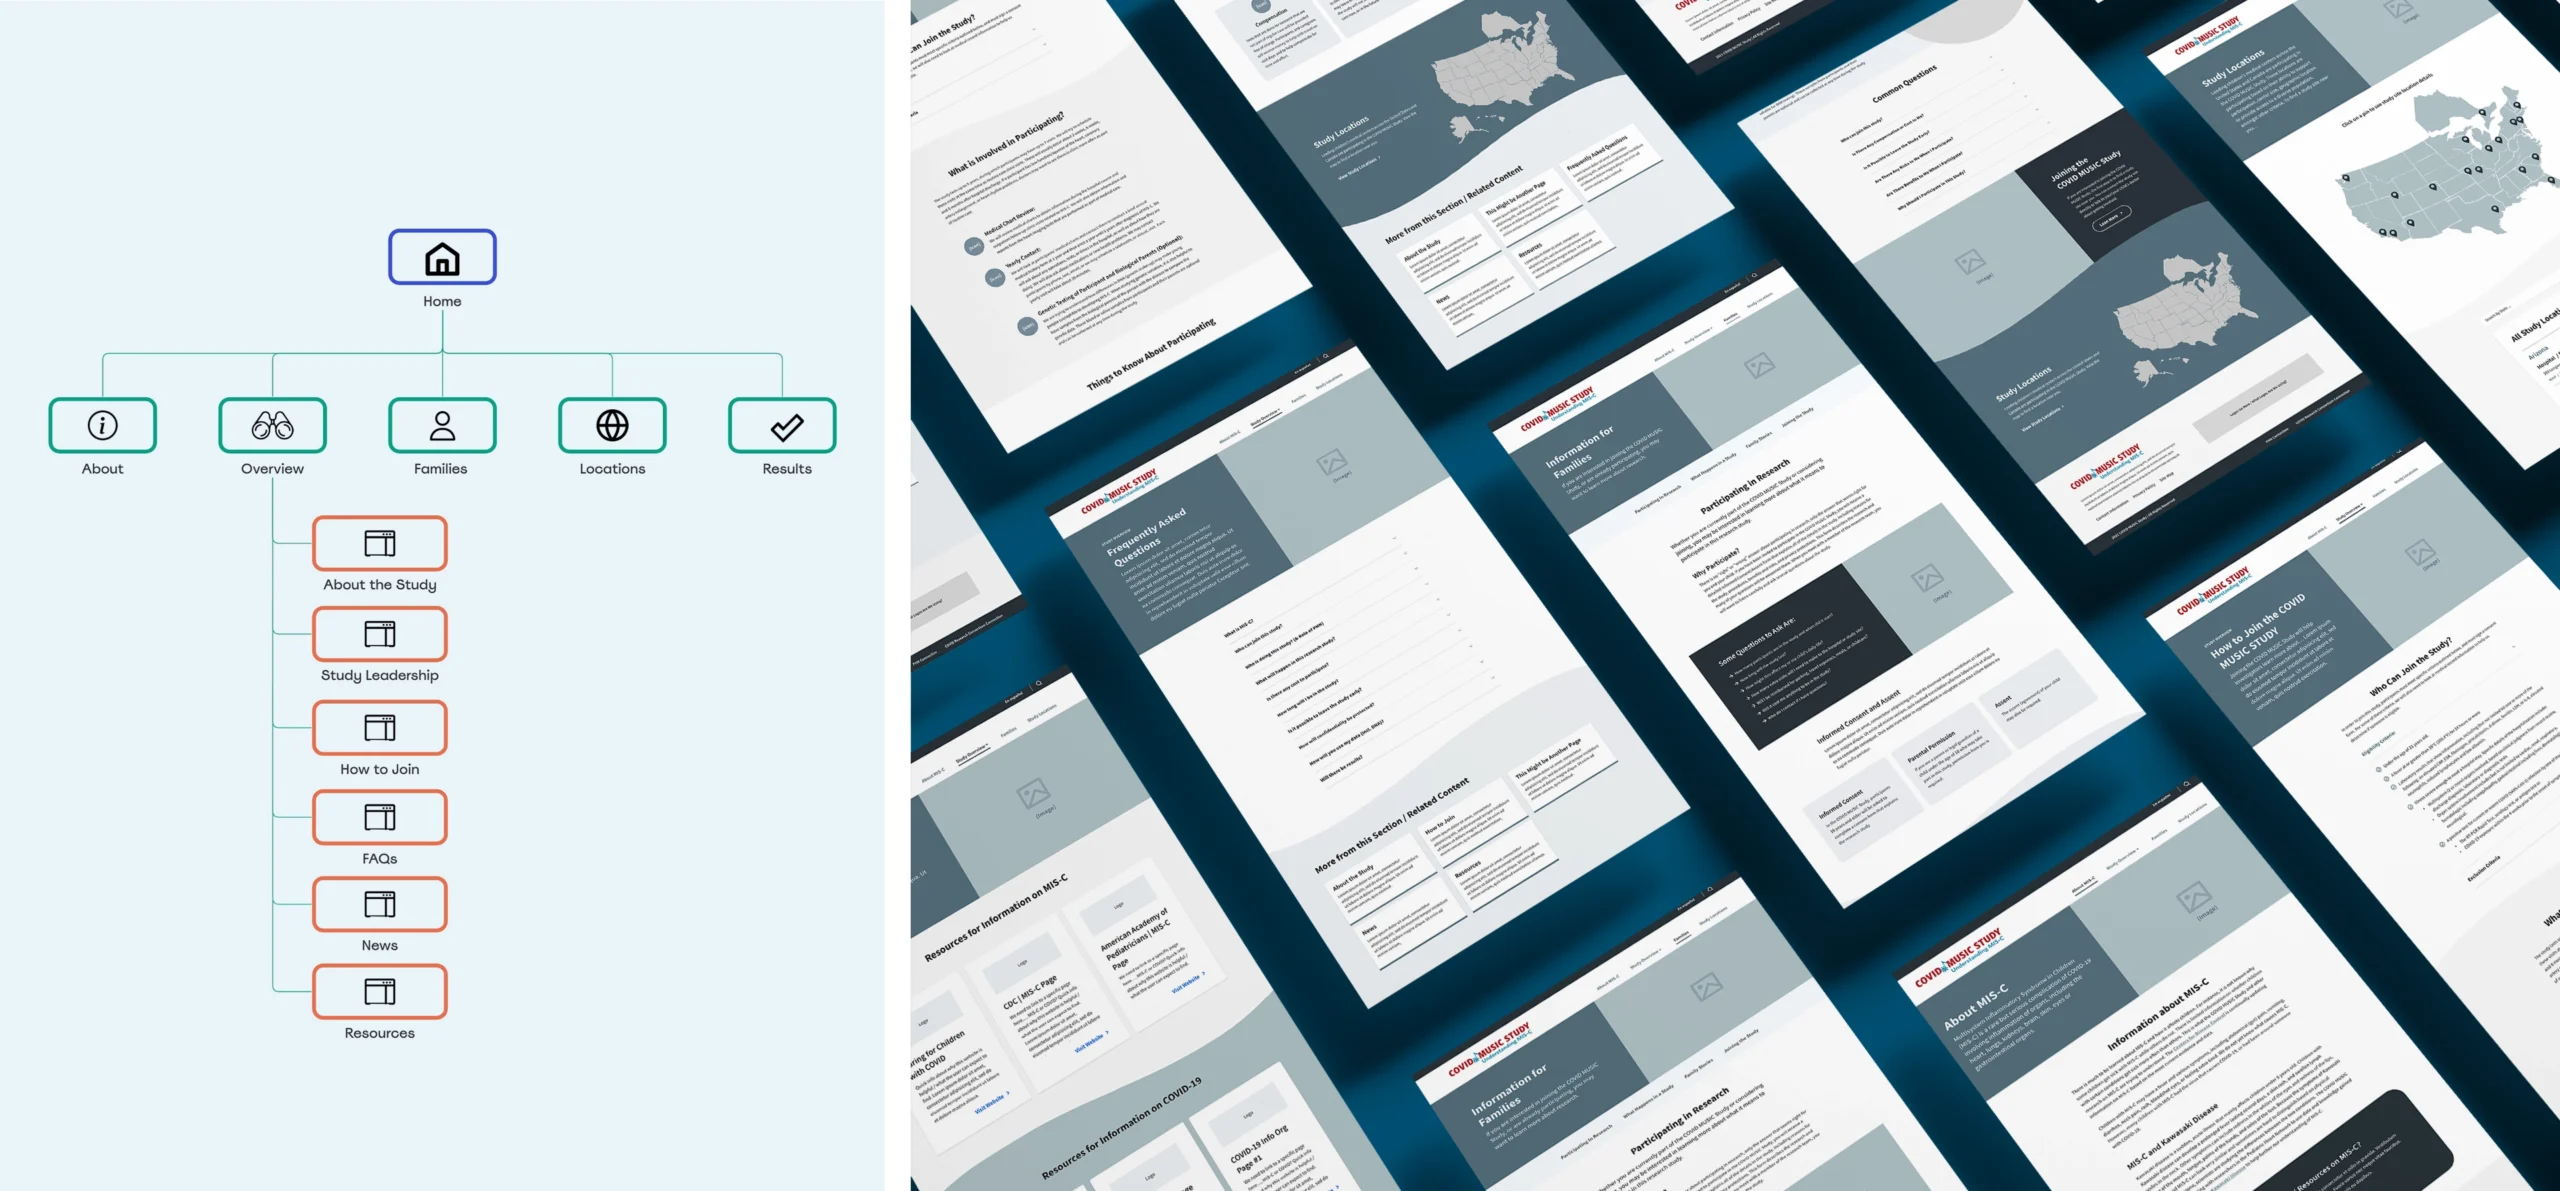 CMS sitemap and wireframes